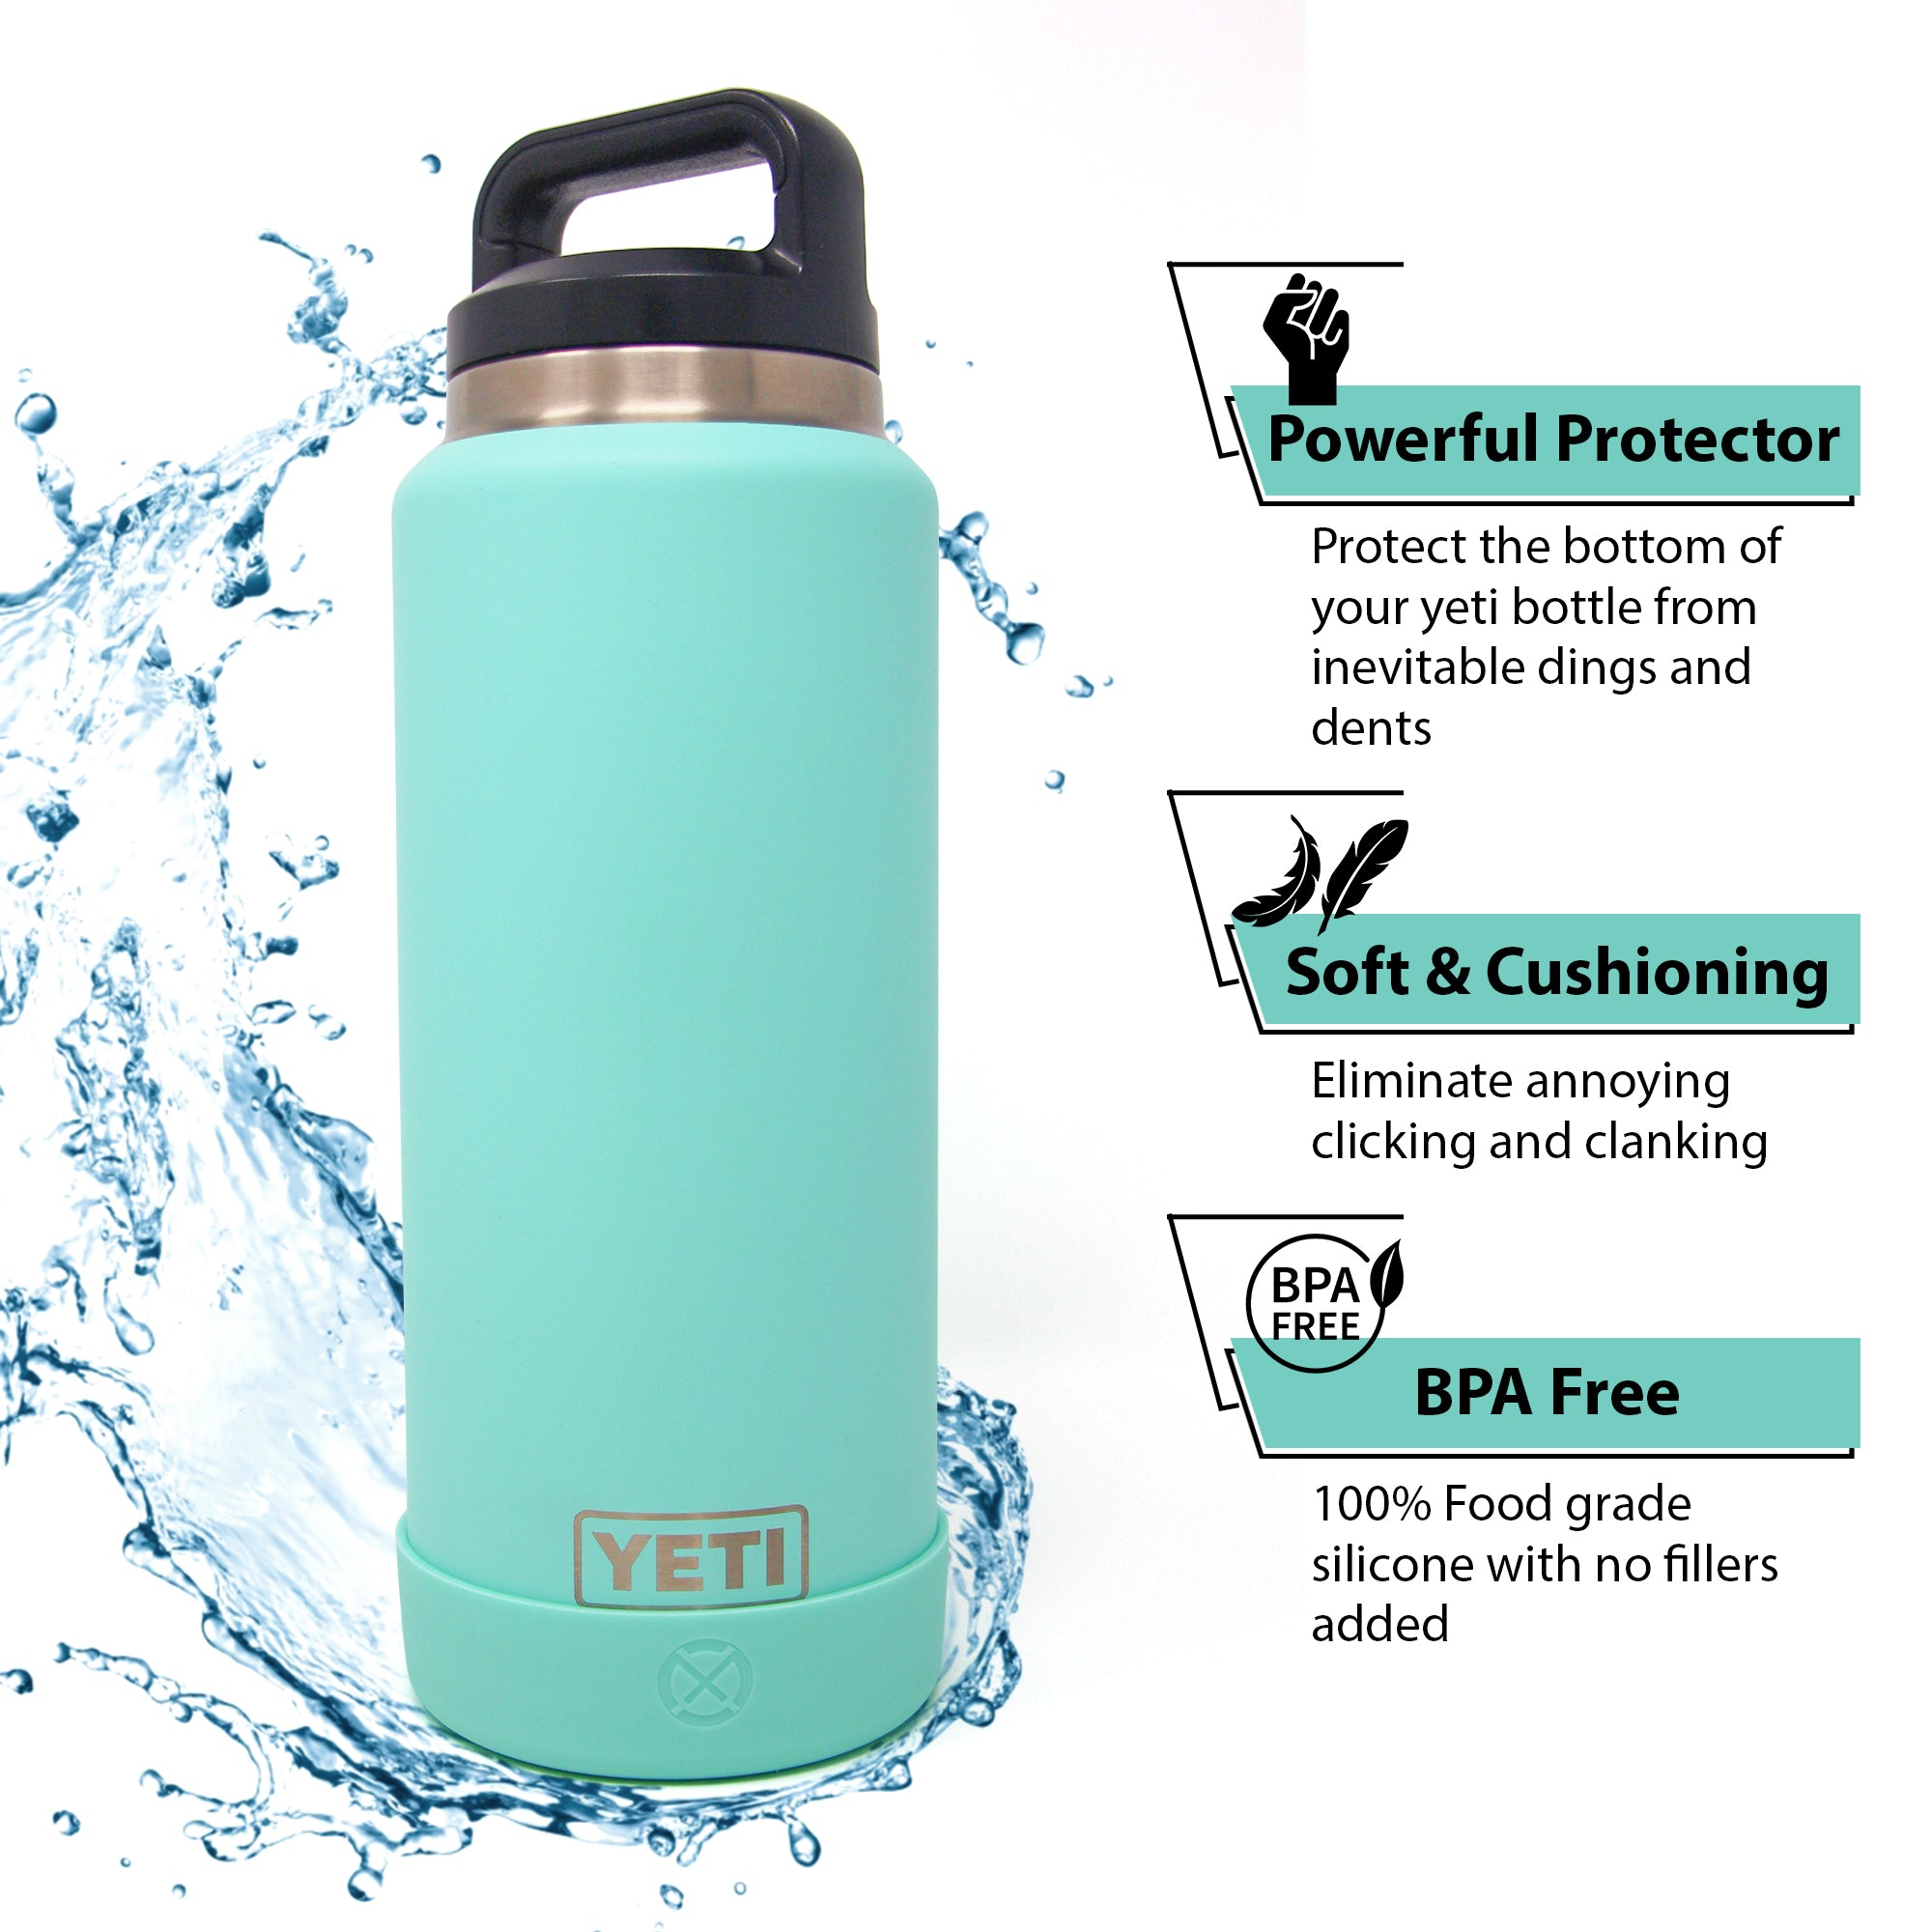 Anti-slip Silicone Boot For Water Bottles - Protects Hydro Flask